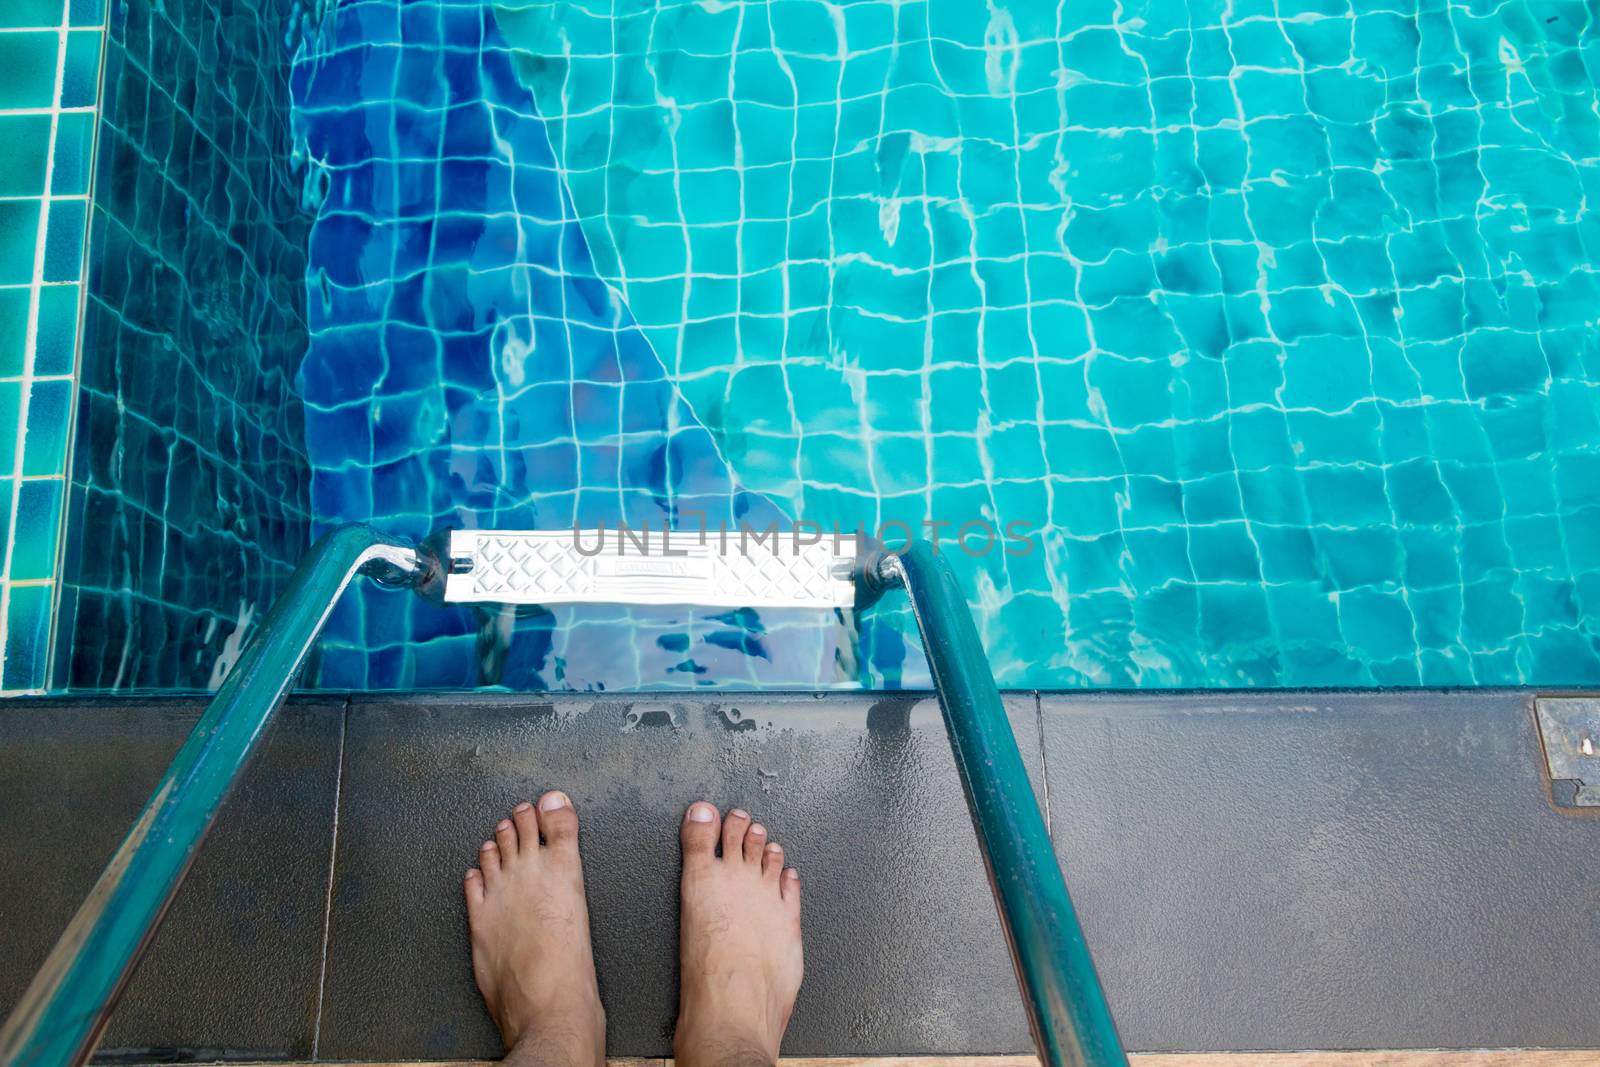 The feet of an Asian man standing at the edge of the pool To swim in the pool